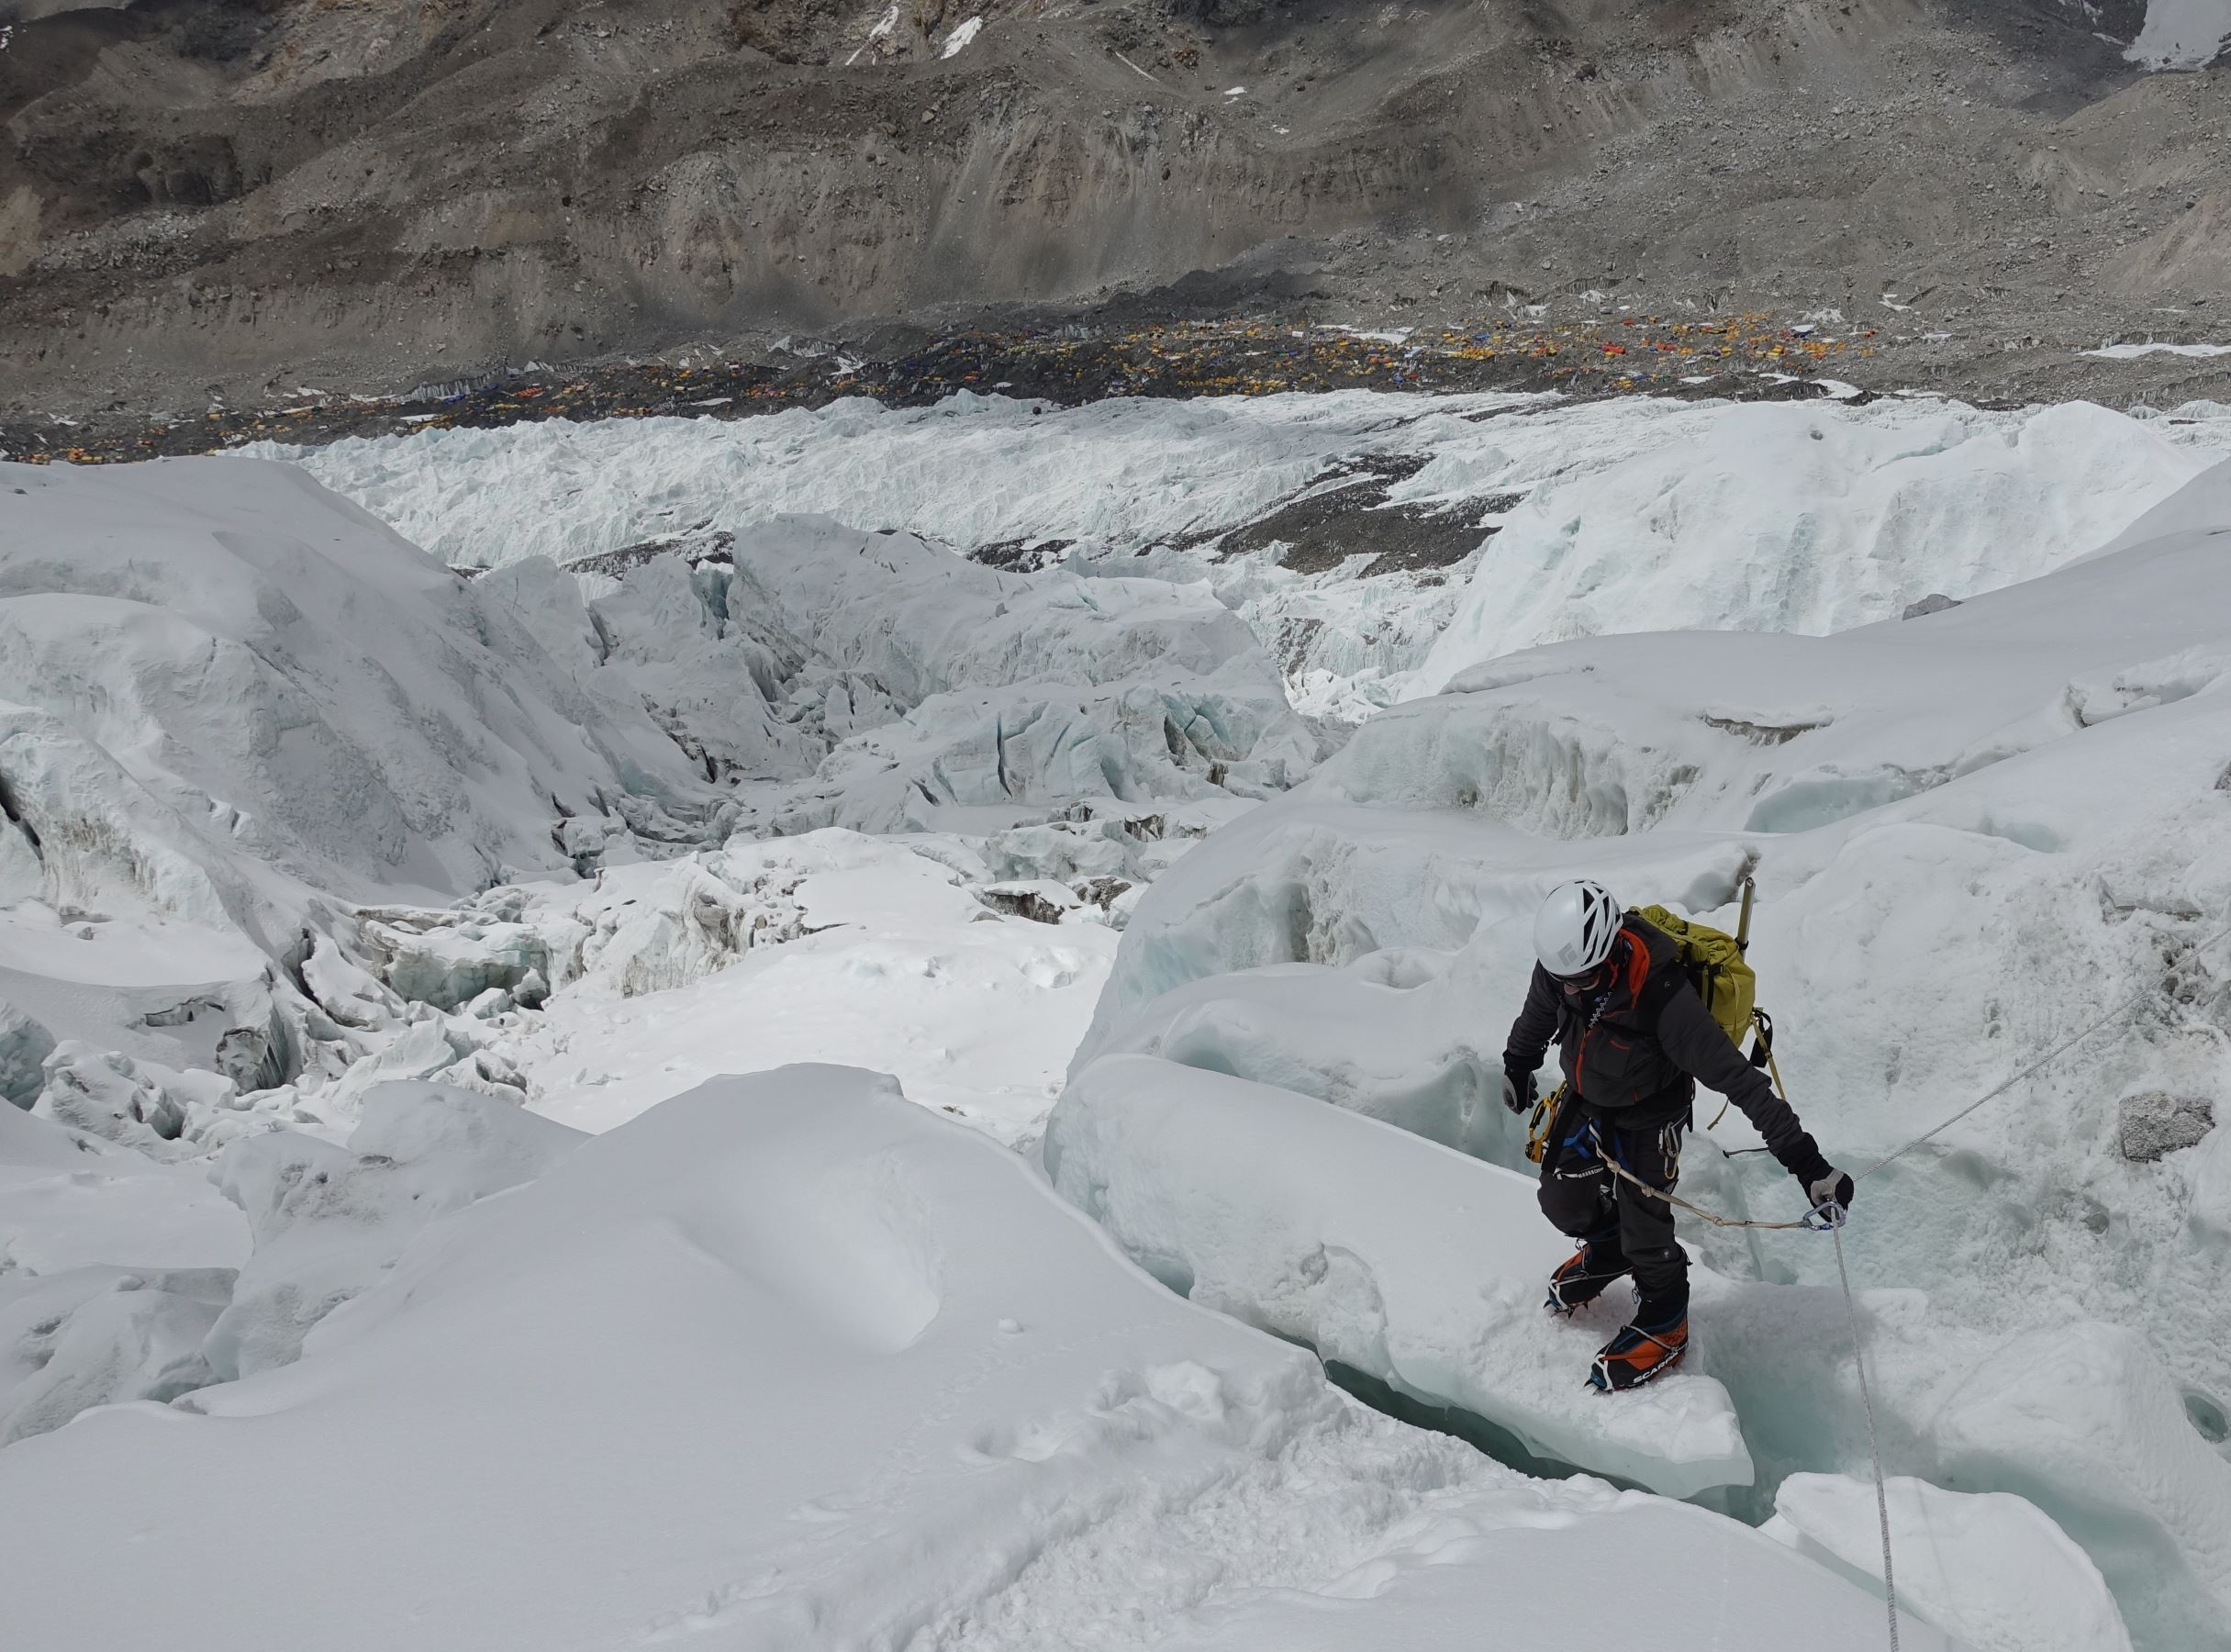 Climbing through the Khumbu icefall on Mt Everest with base camp behind